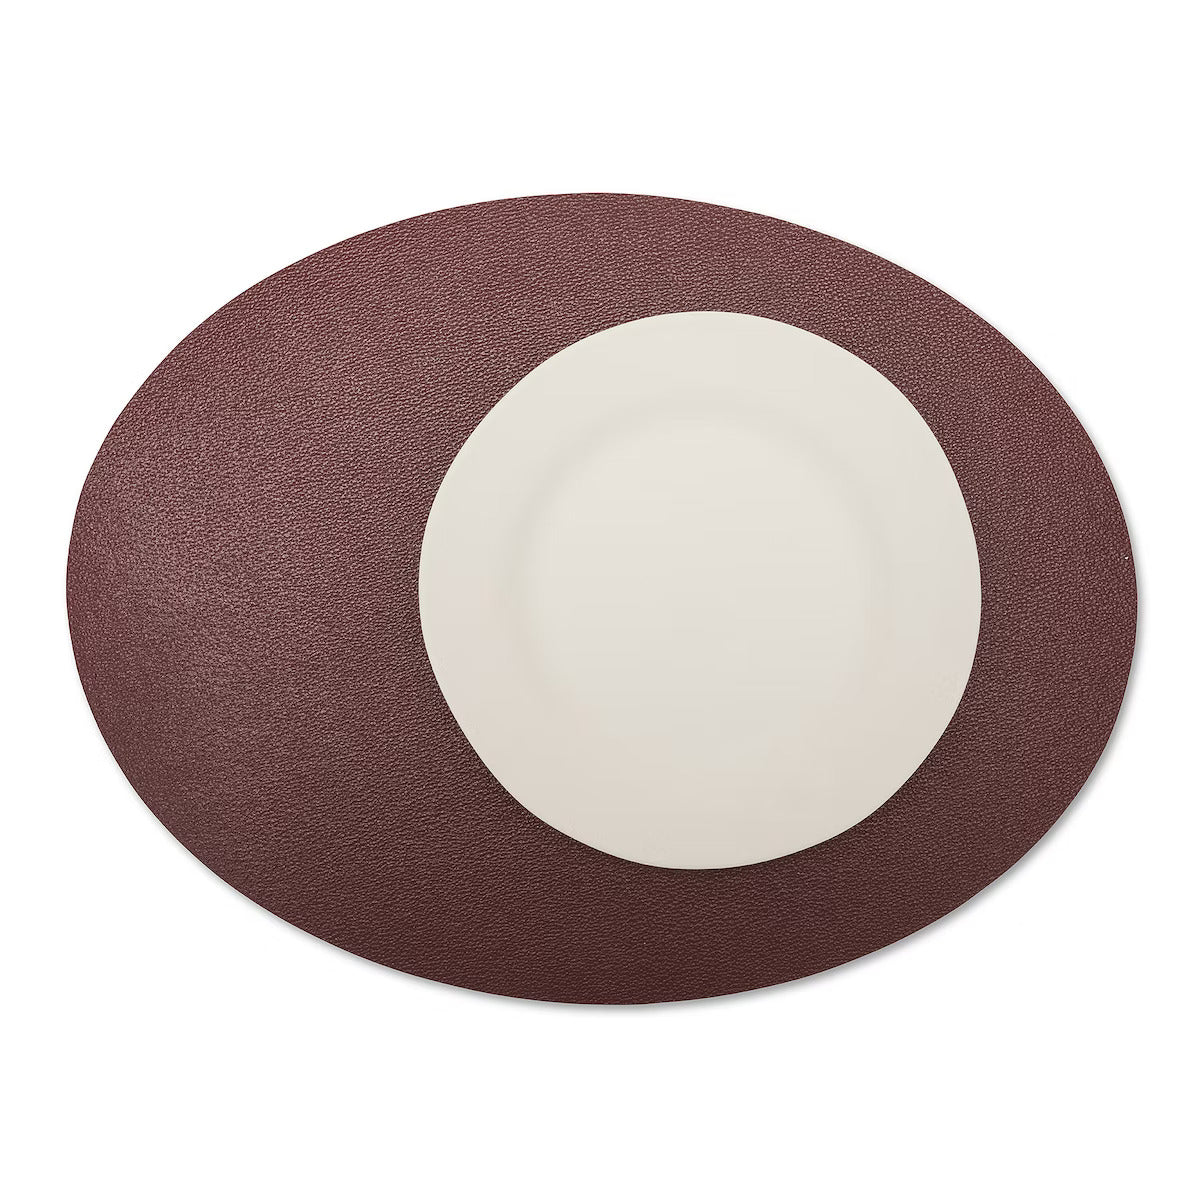 A large oval textured washable paper placemat in dark red is shown under a white plate.